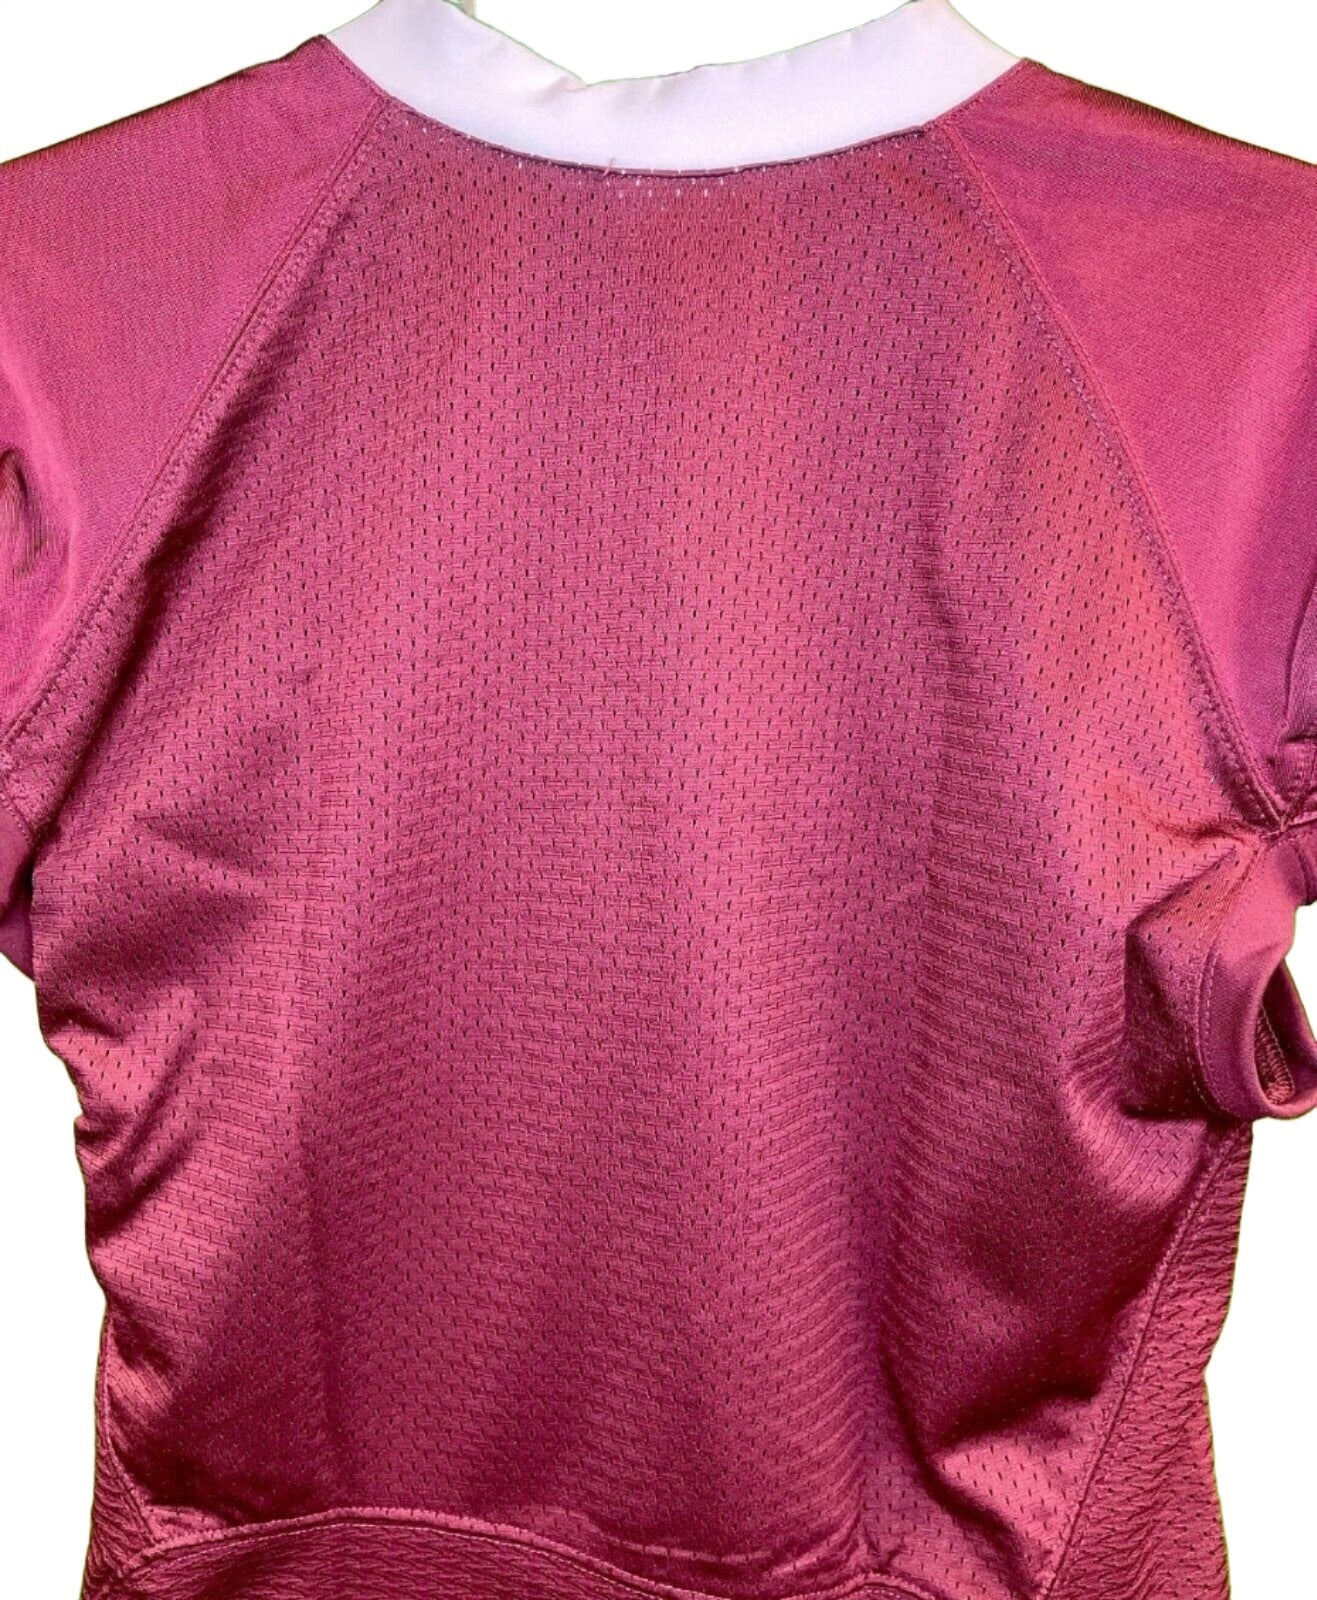 American Football Alleson Burgundy Jersey Youth Large